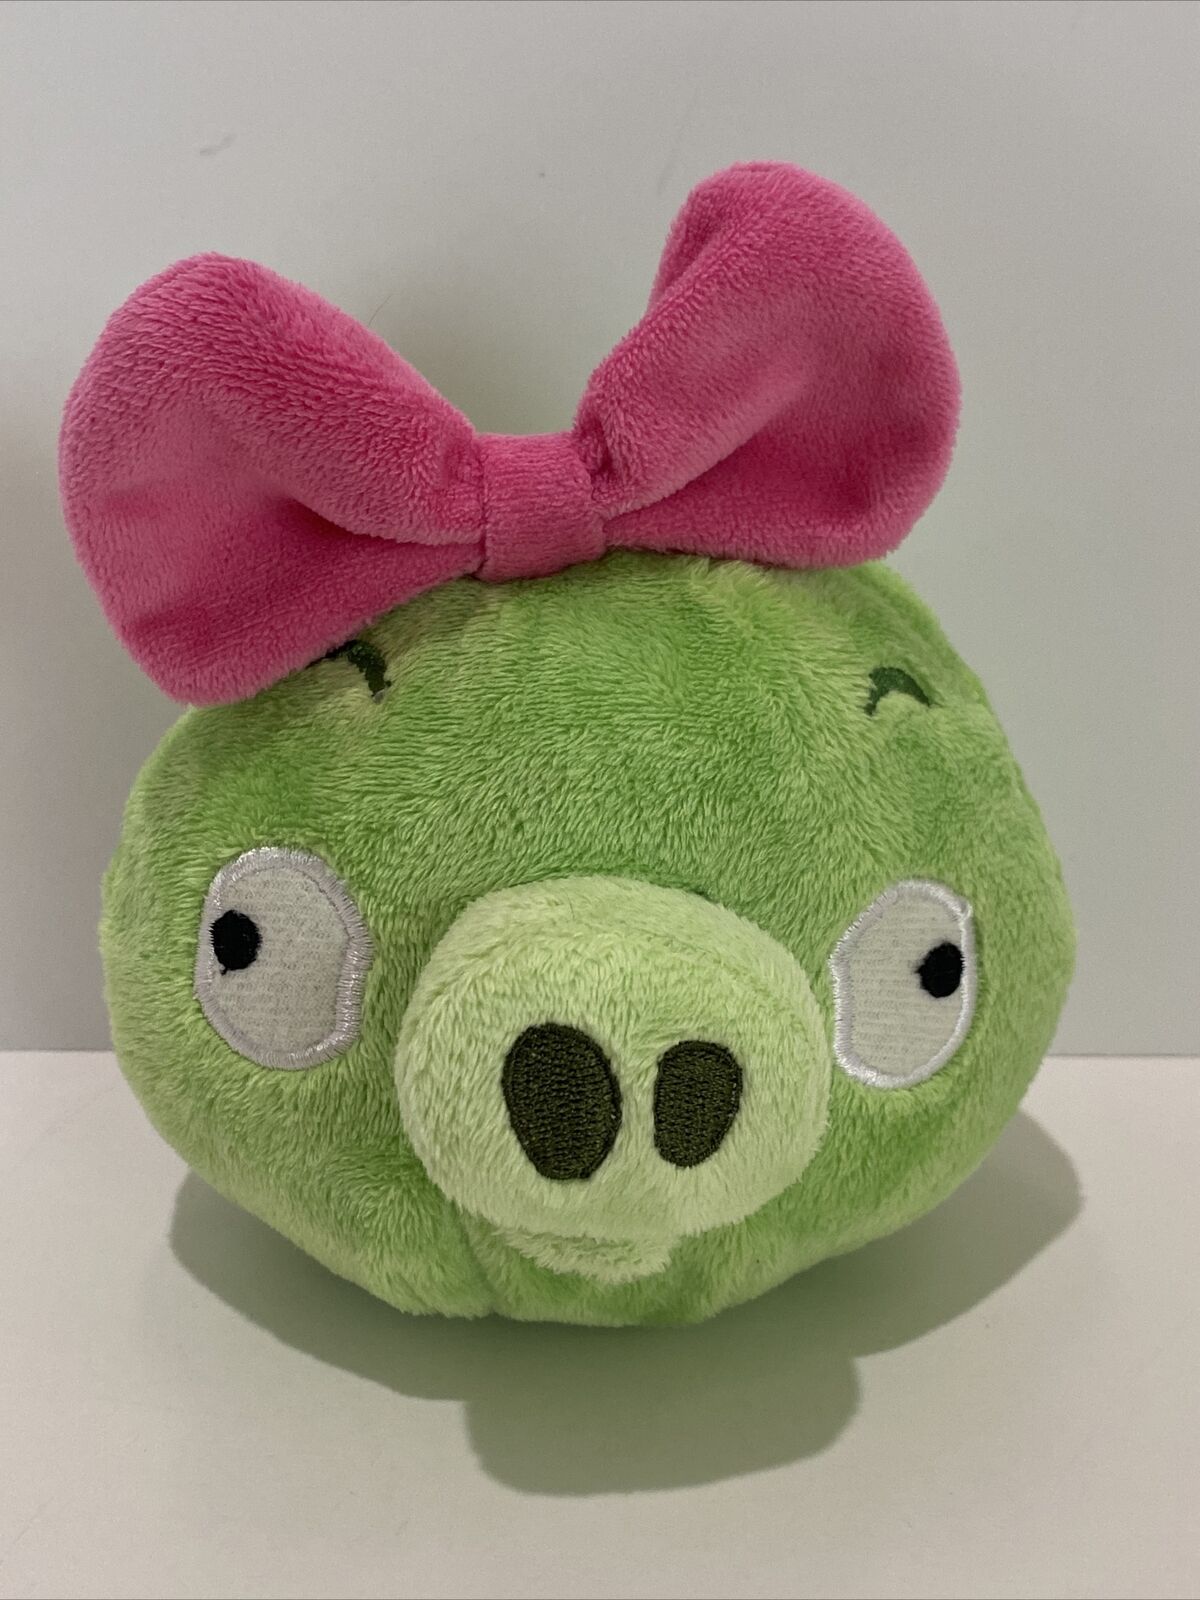 2011 Angry Birds Commonwealth Good Stuff Toys Green Pig Girl Pink Bow Plush 5”